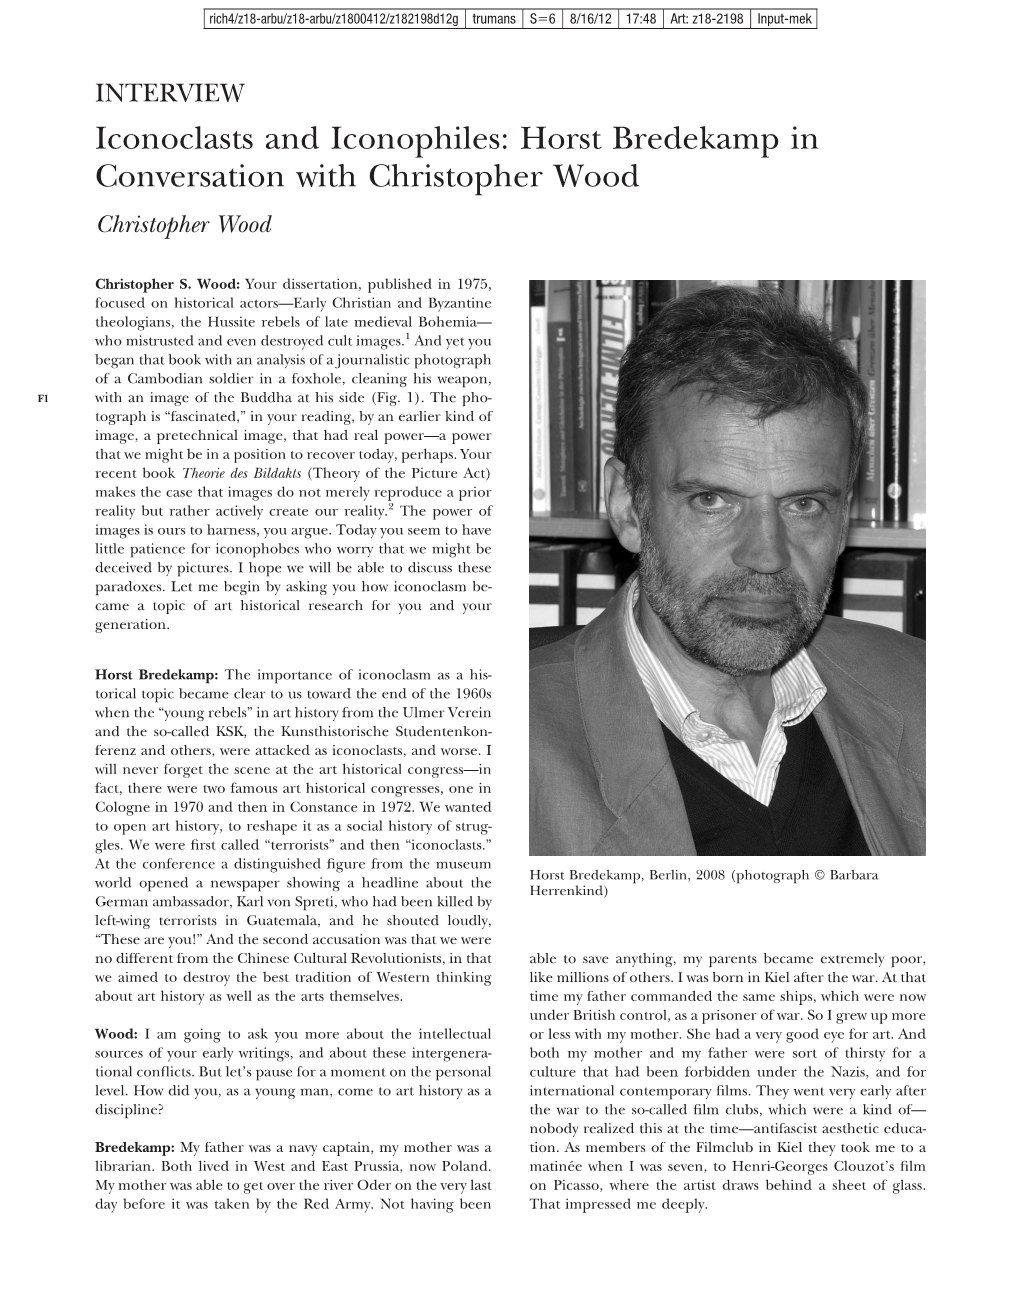 Iconoclasts and Iconophiles: Horst Bredekamp in Conversation with Christopher Wood Christopher Wood